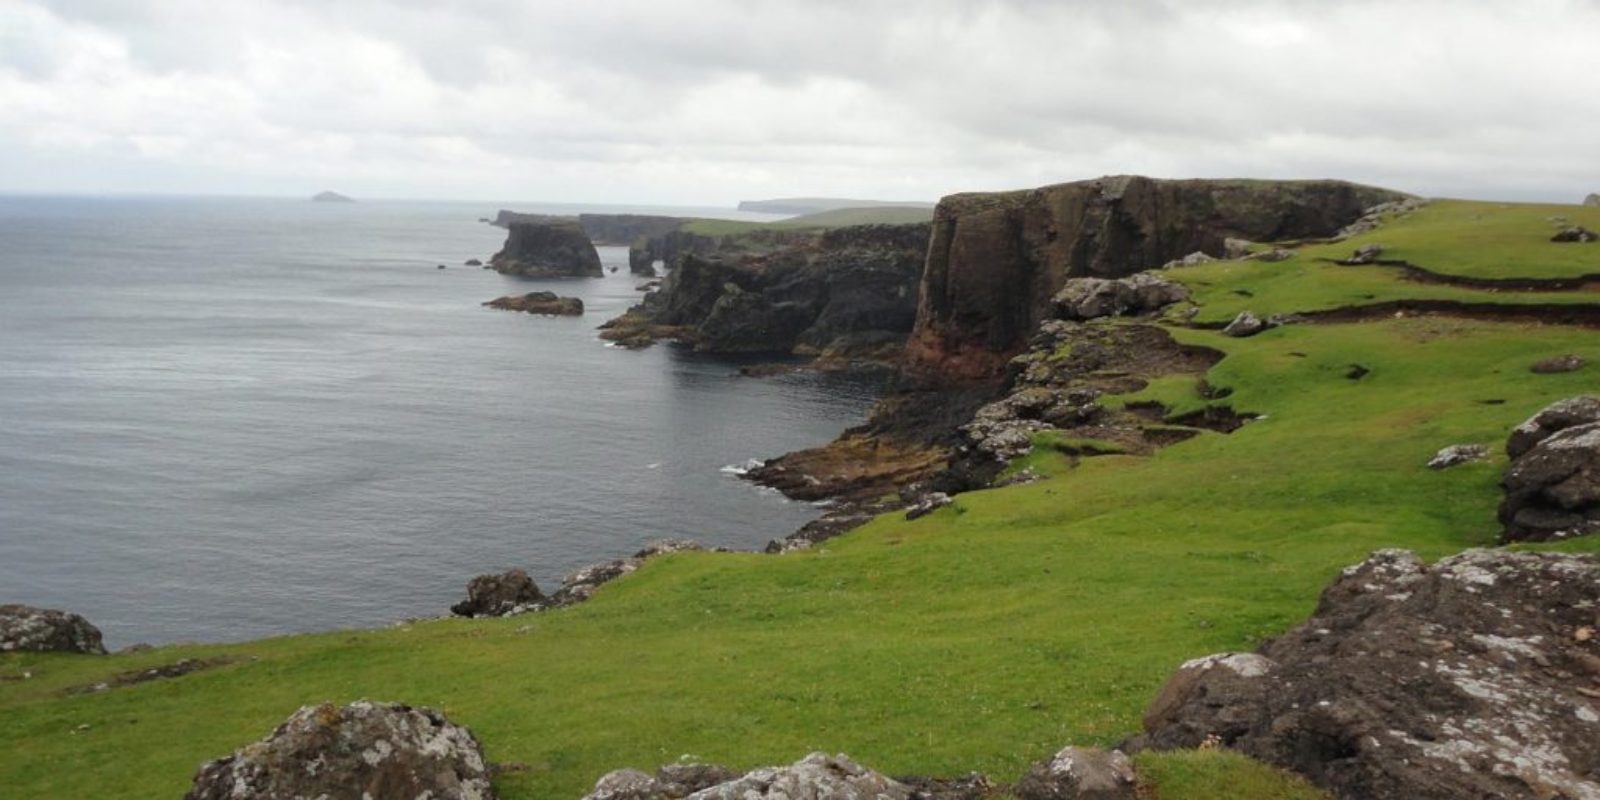 Scotland's islands are like extensions of the mainland. They are full of prehistoric sites, of white sandy beaches, rare bird colonies, and more. Visit in..